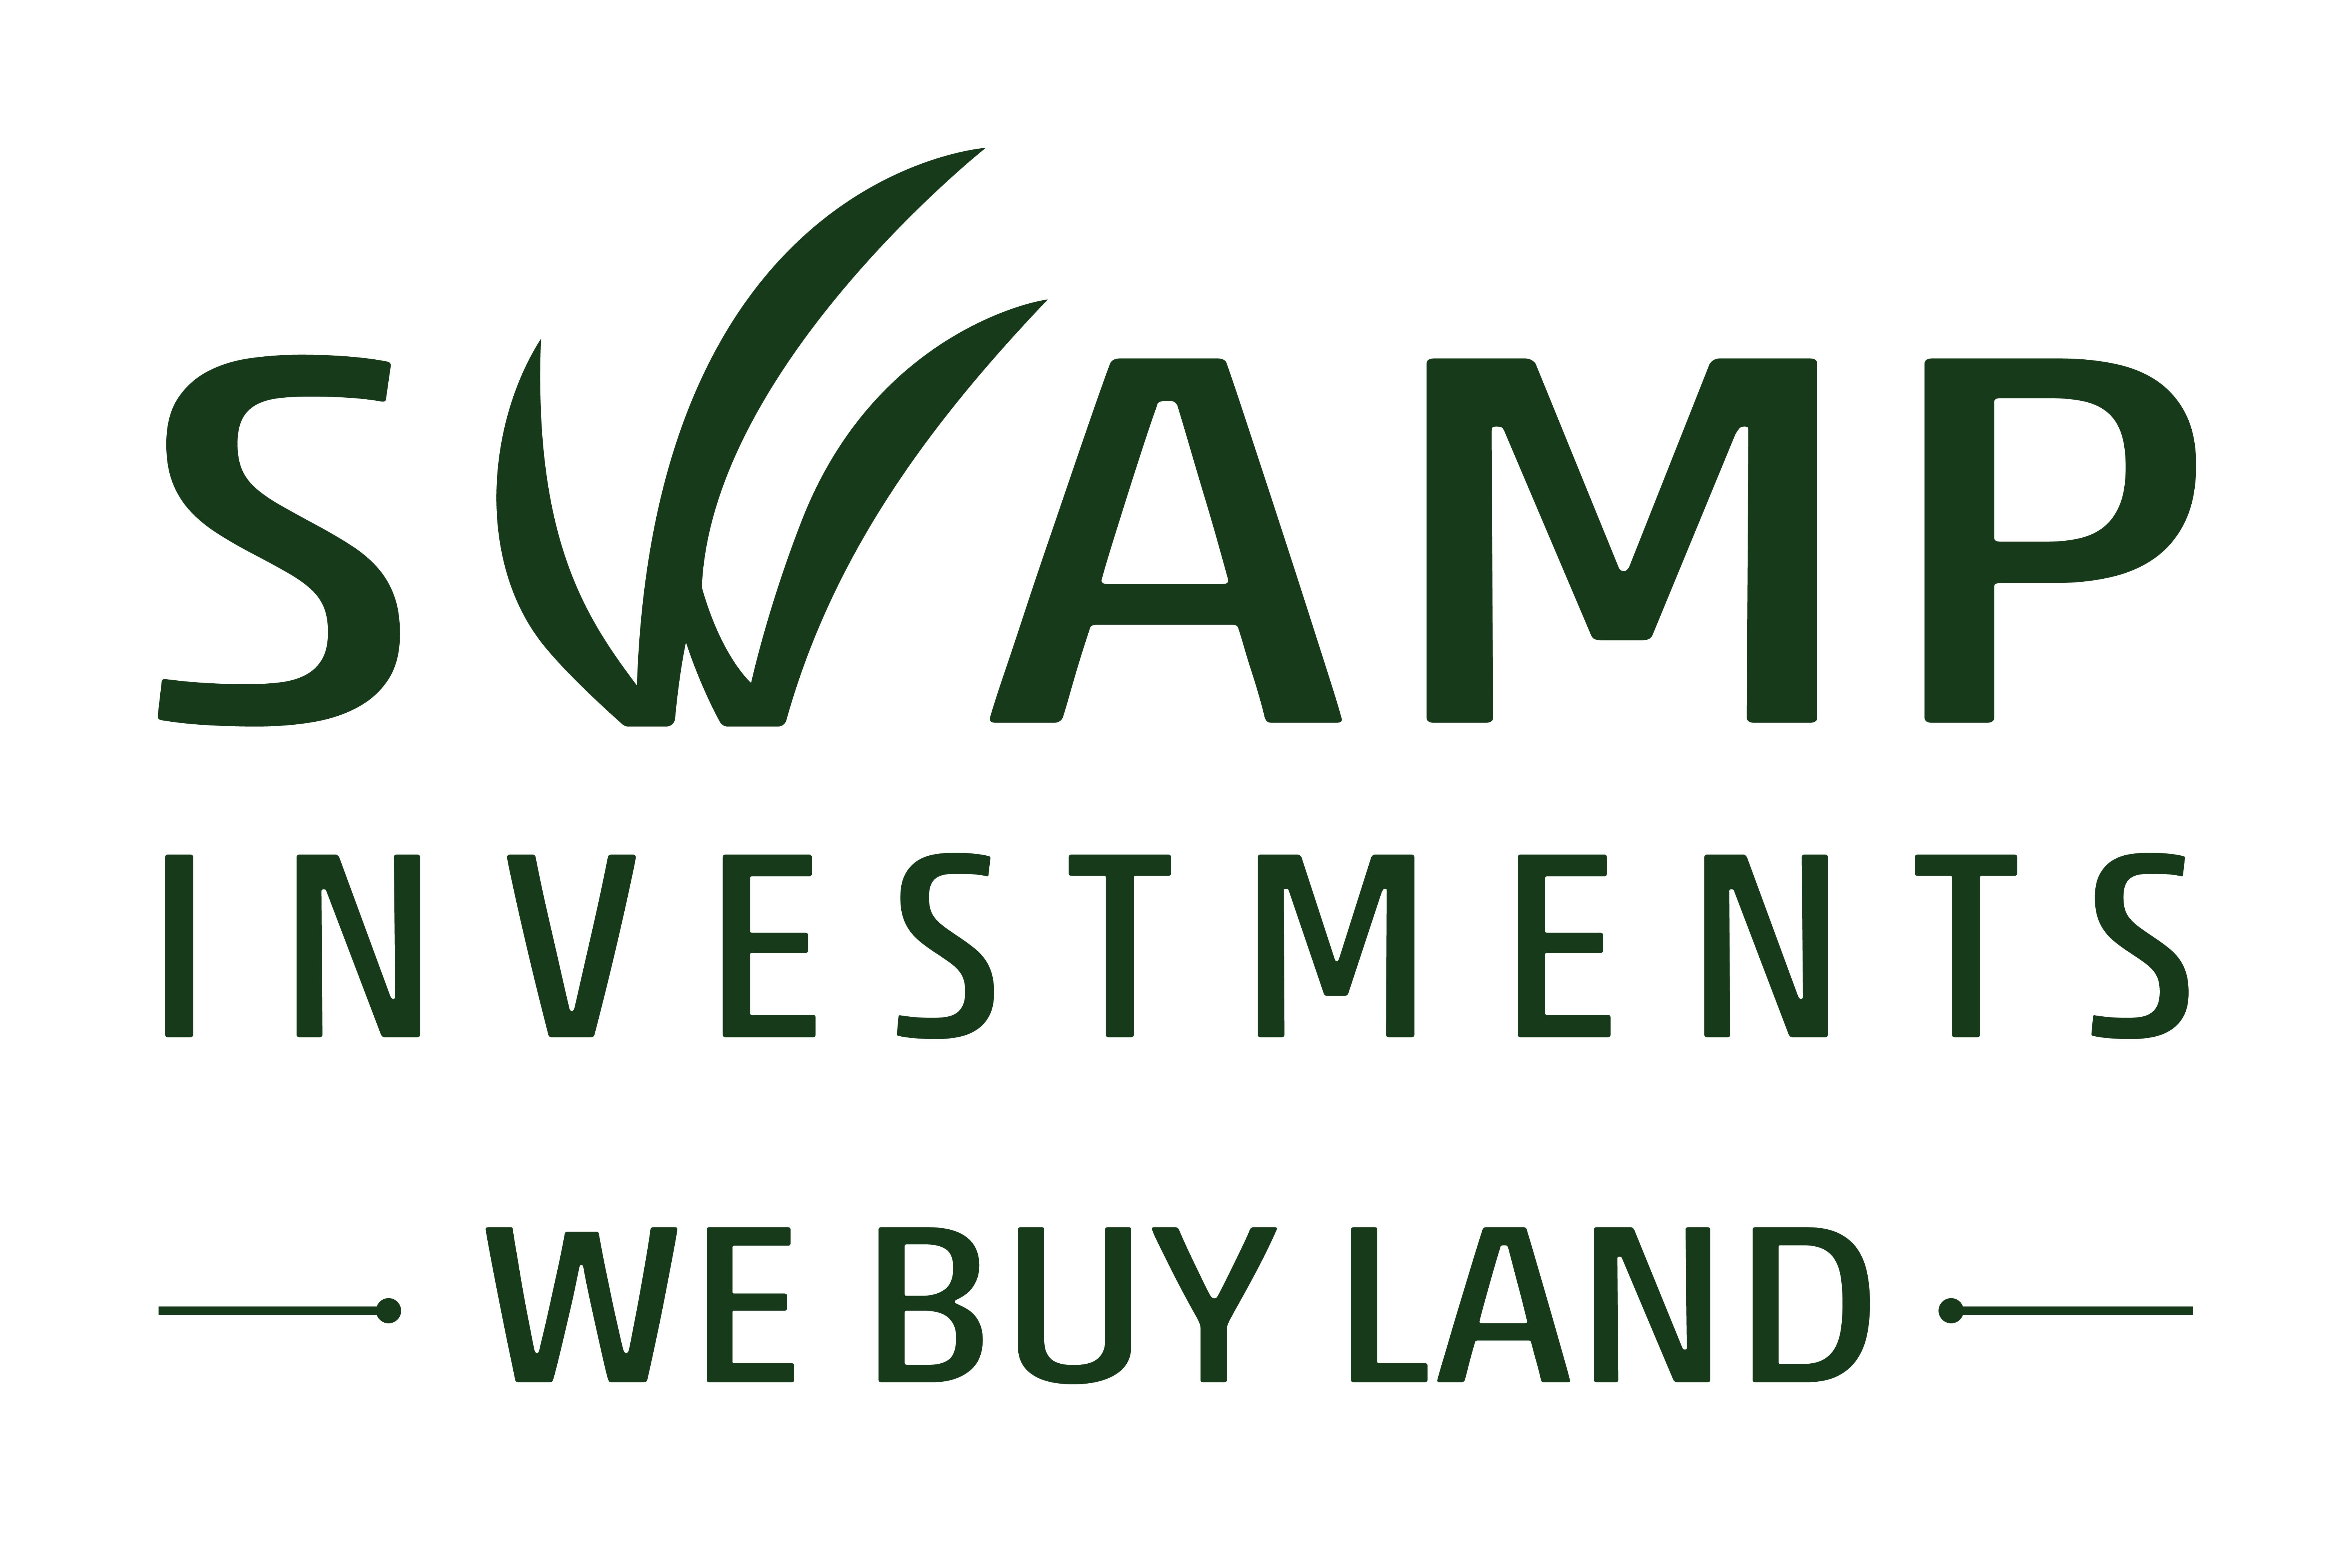 Swamp Investments We Buy Land logo in green